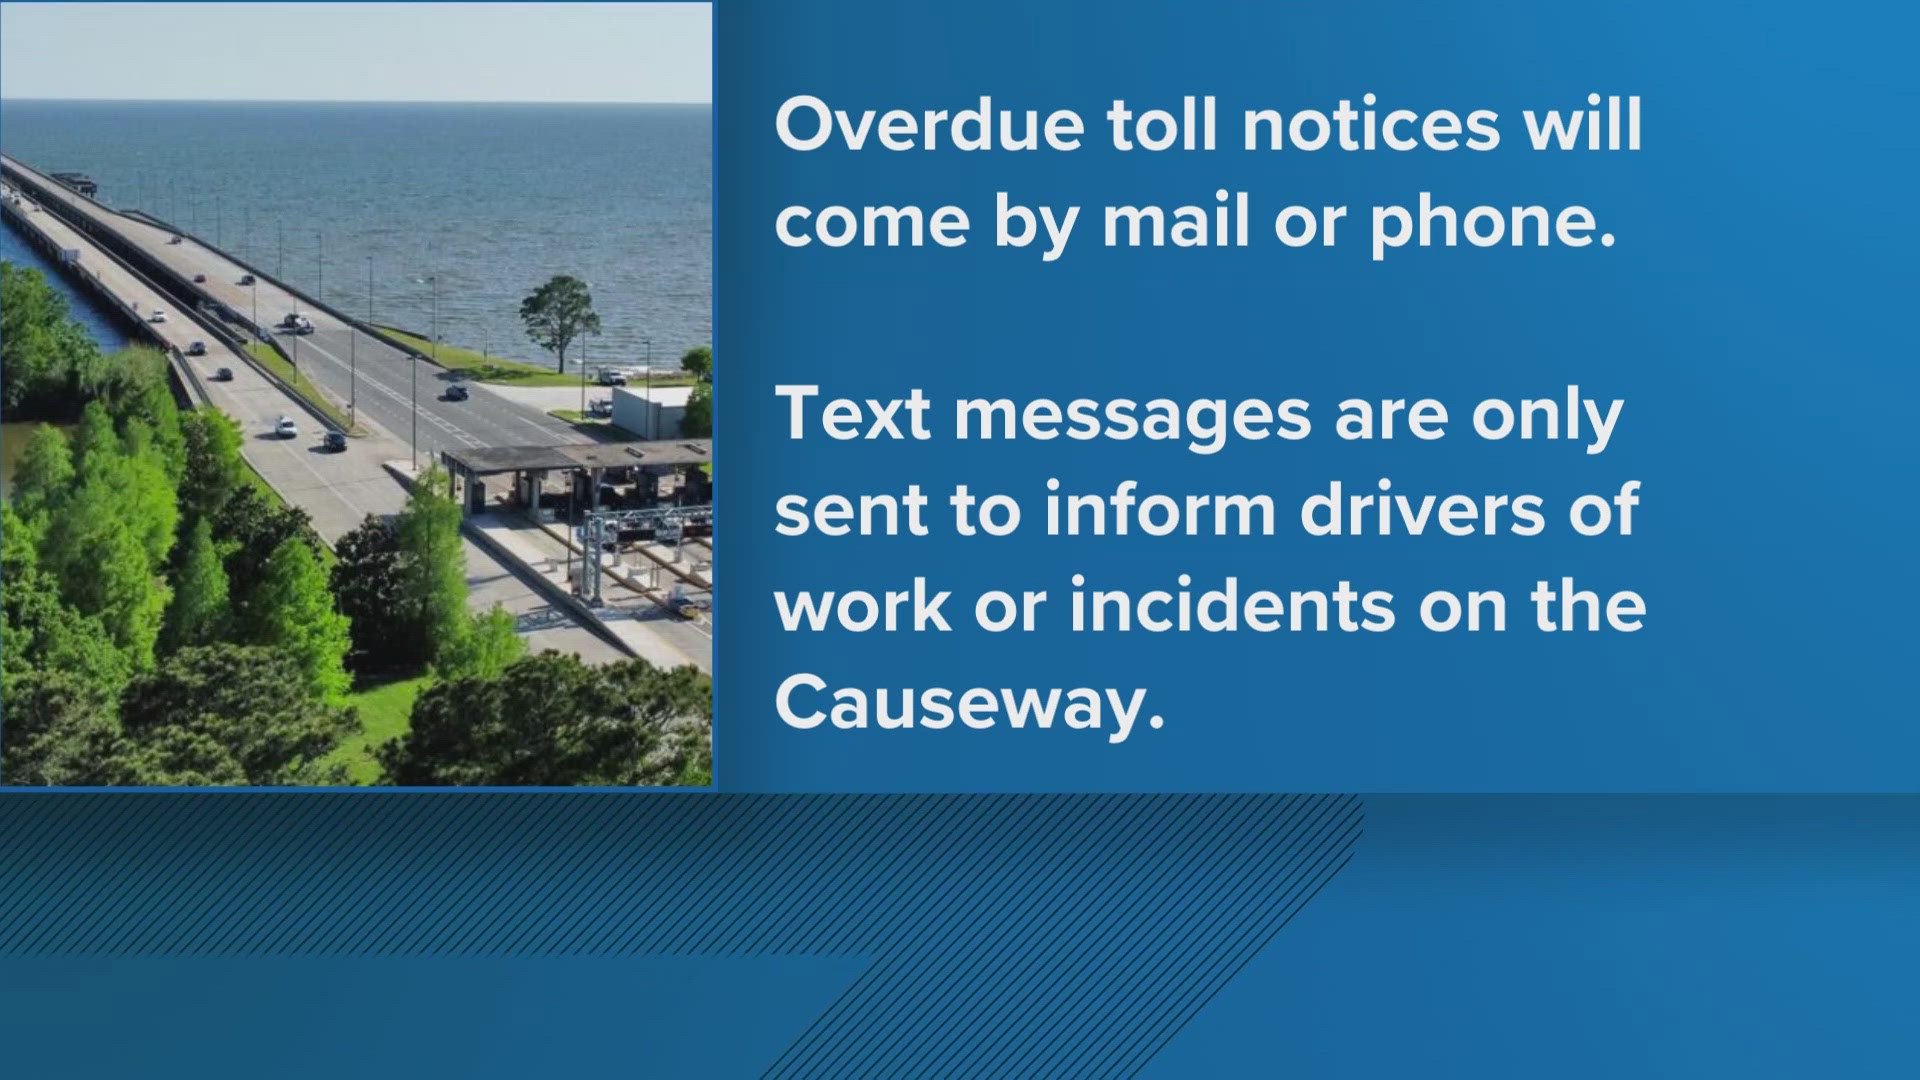 A new scam is making the rounds claiming drivers have overdue toll charges.